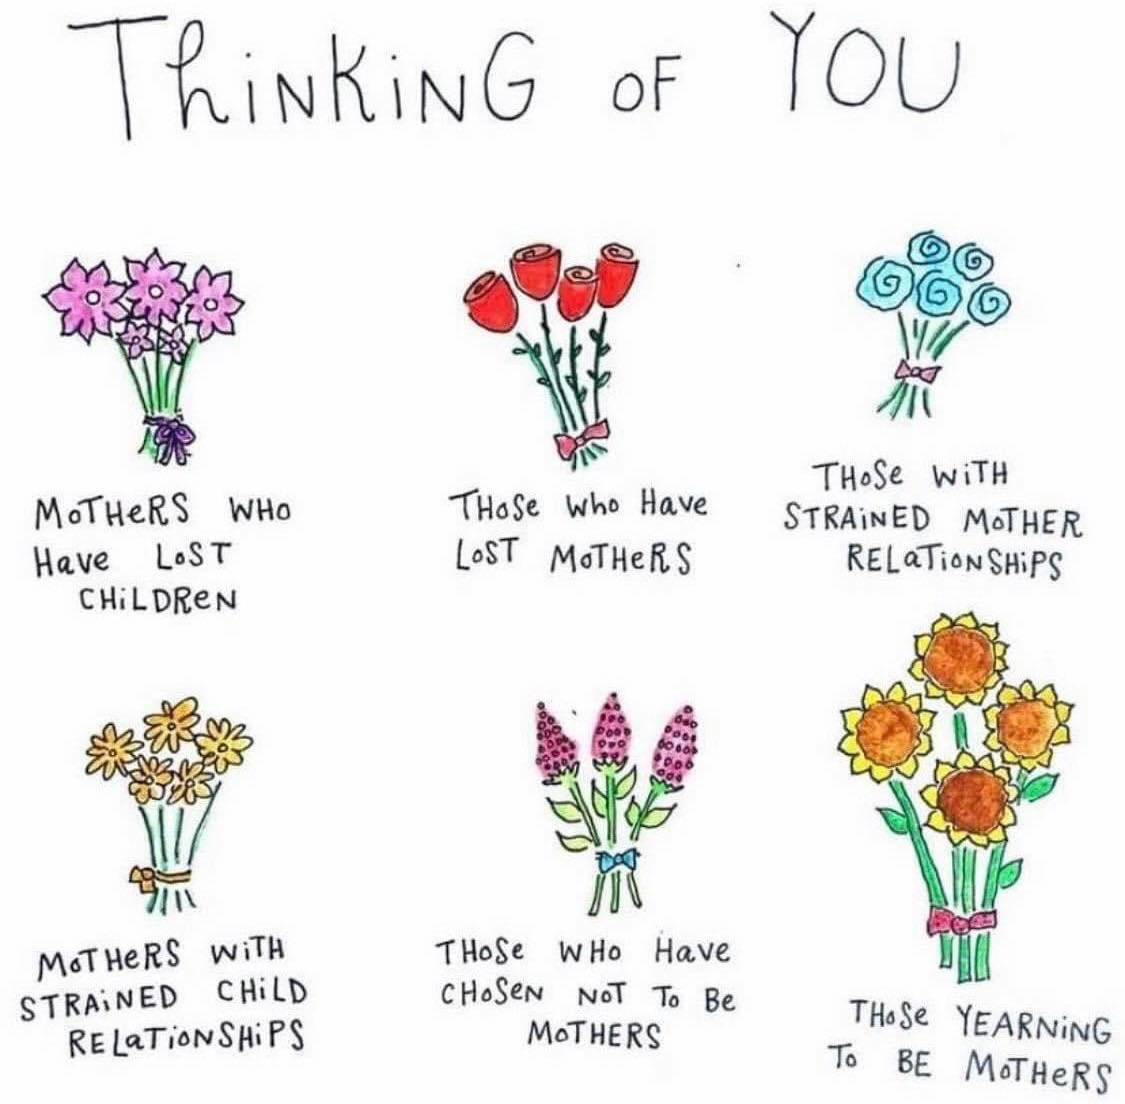 Happy Mother&rsquo;s Day.  However, you never know what someone else is going through. Be kind. Always.